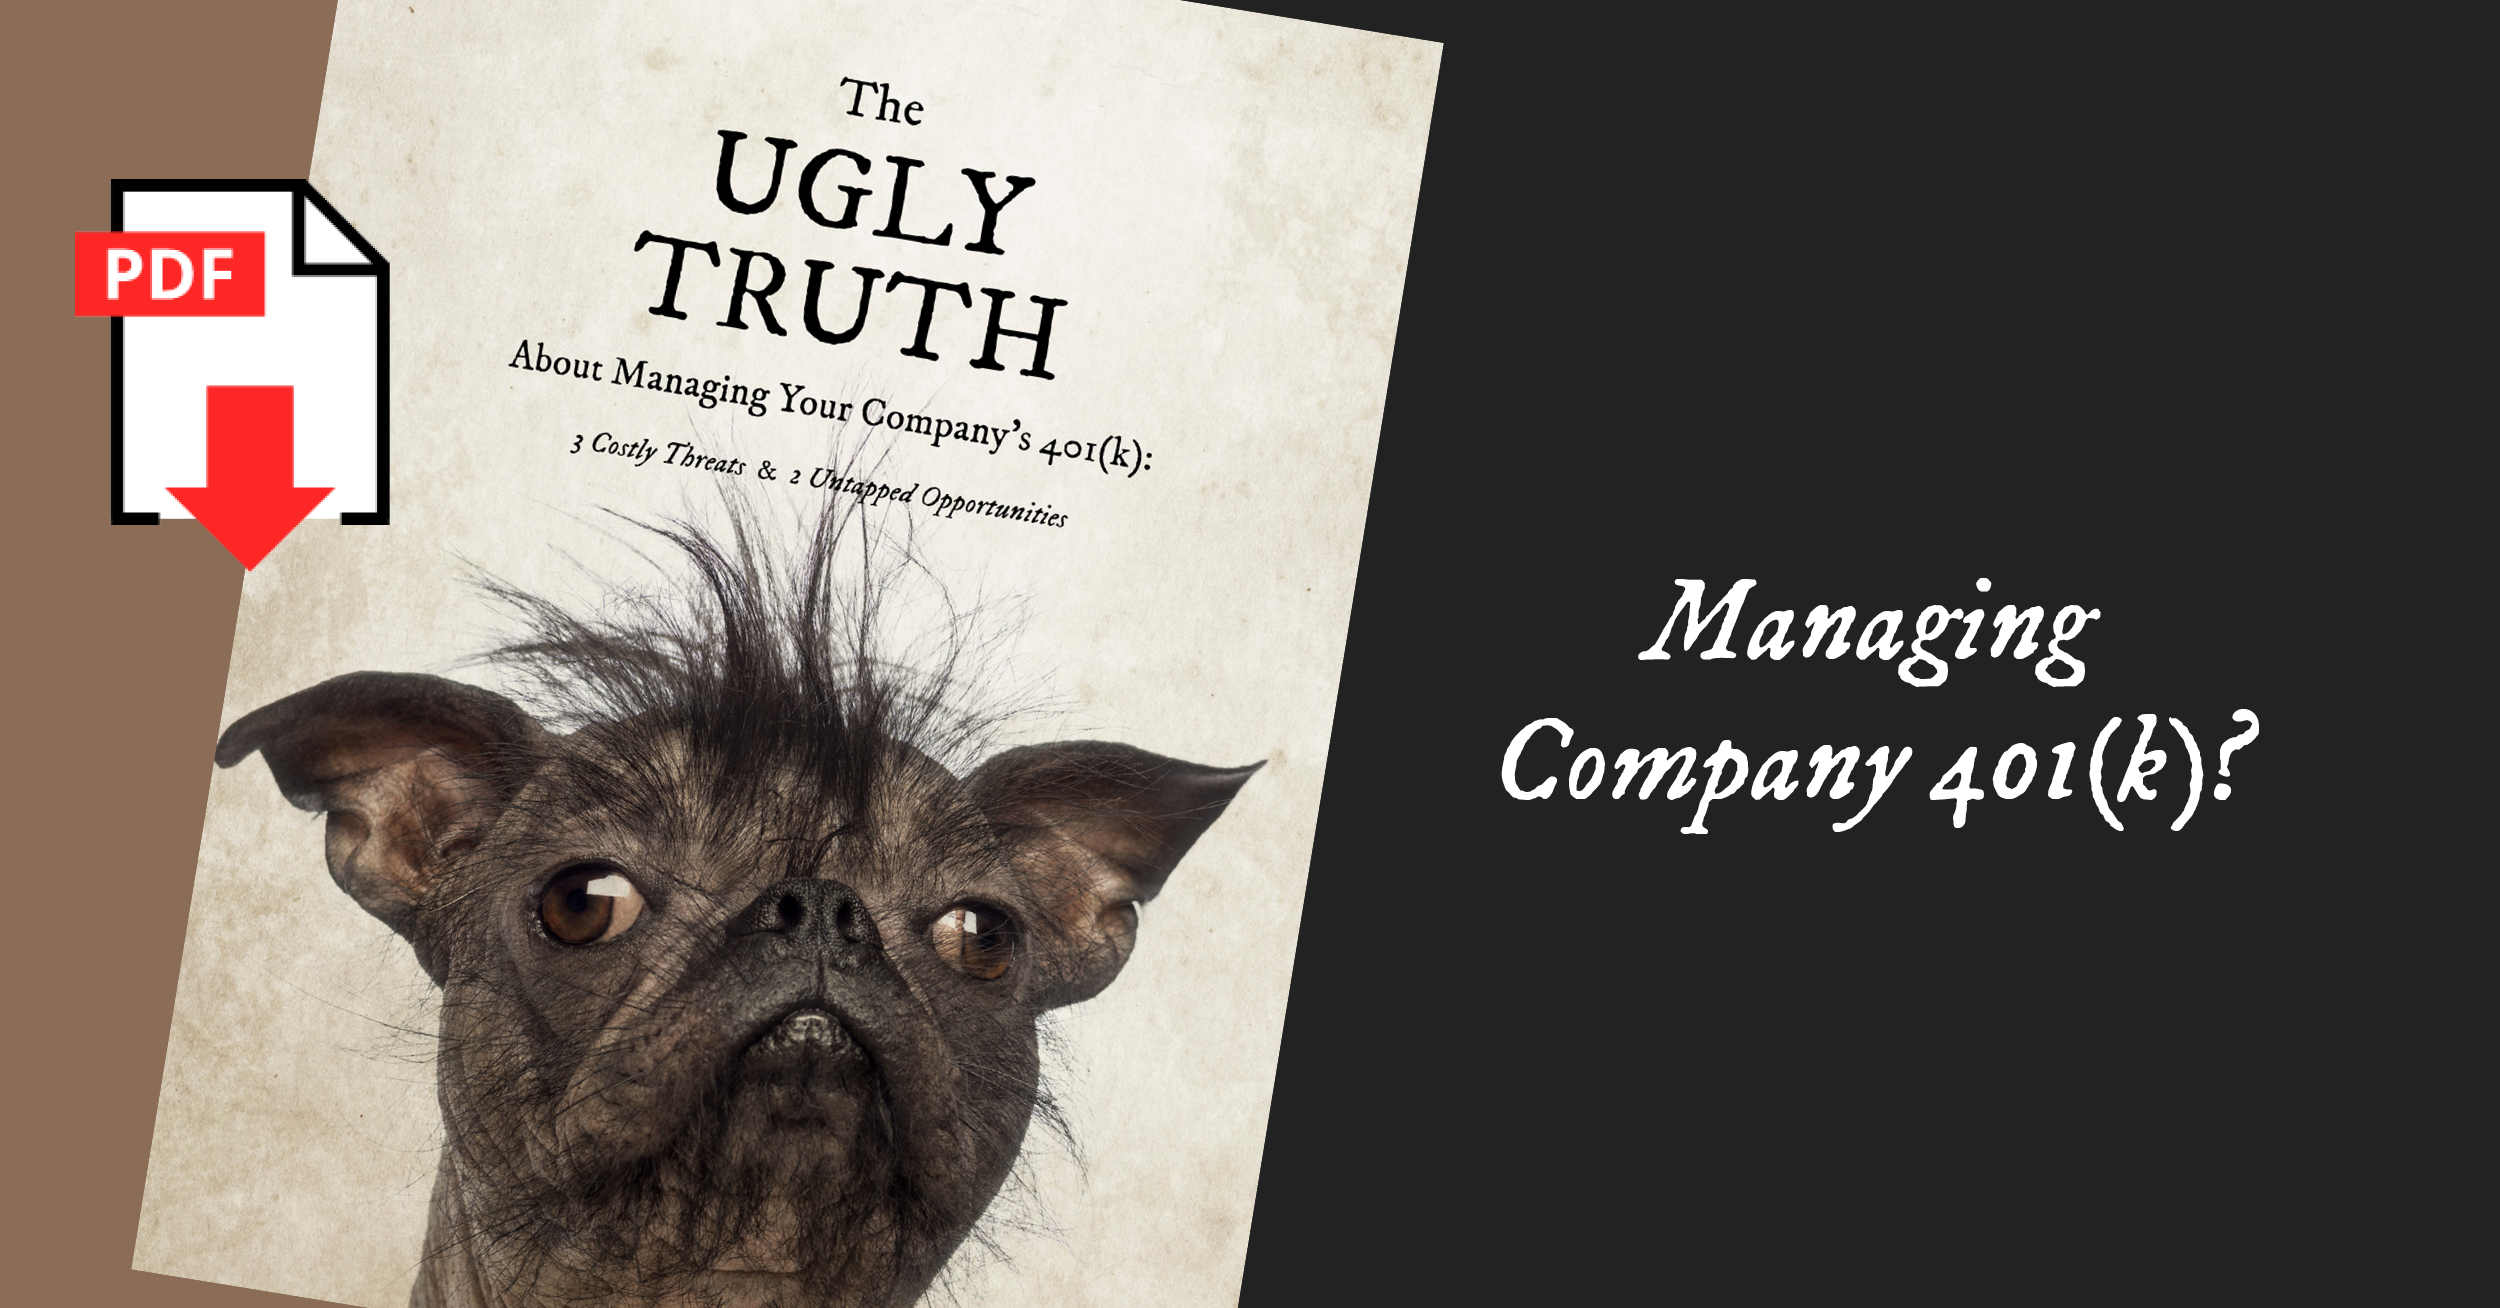 [NEW] Lead Gen Campaign | The Ugly Truth About Managing Your Company’s 401(k)